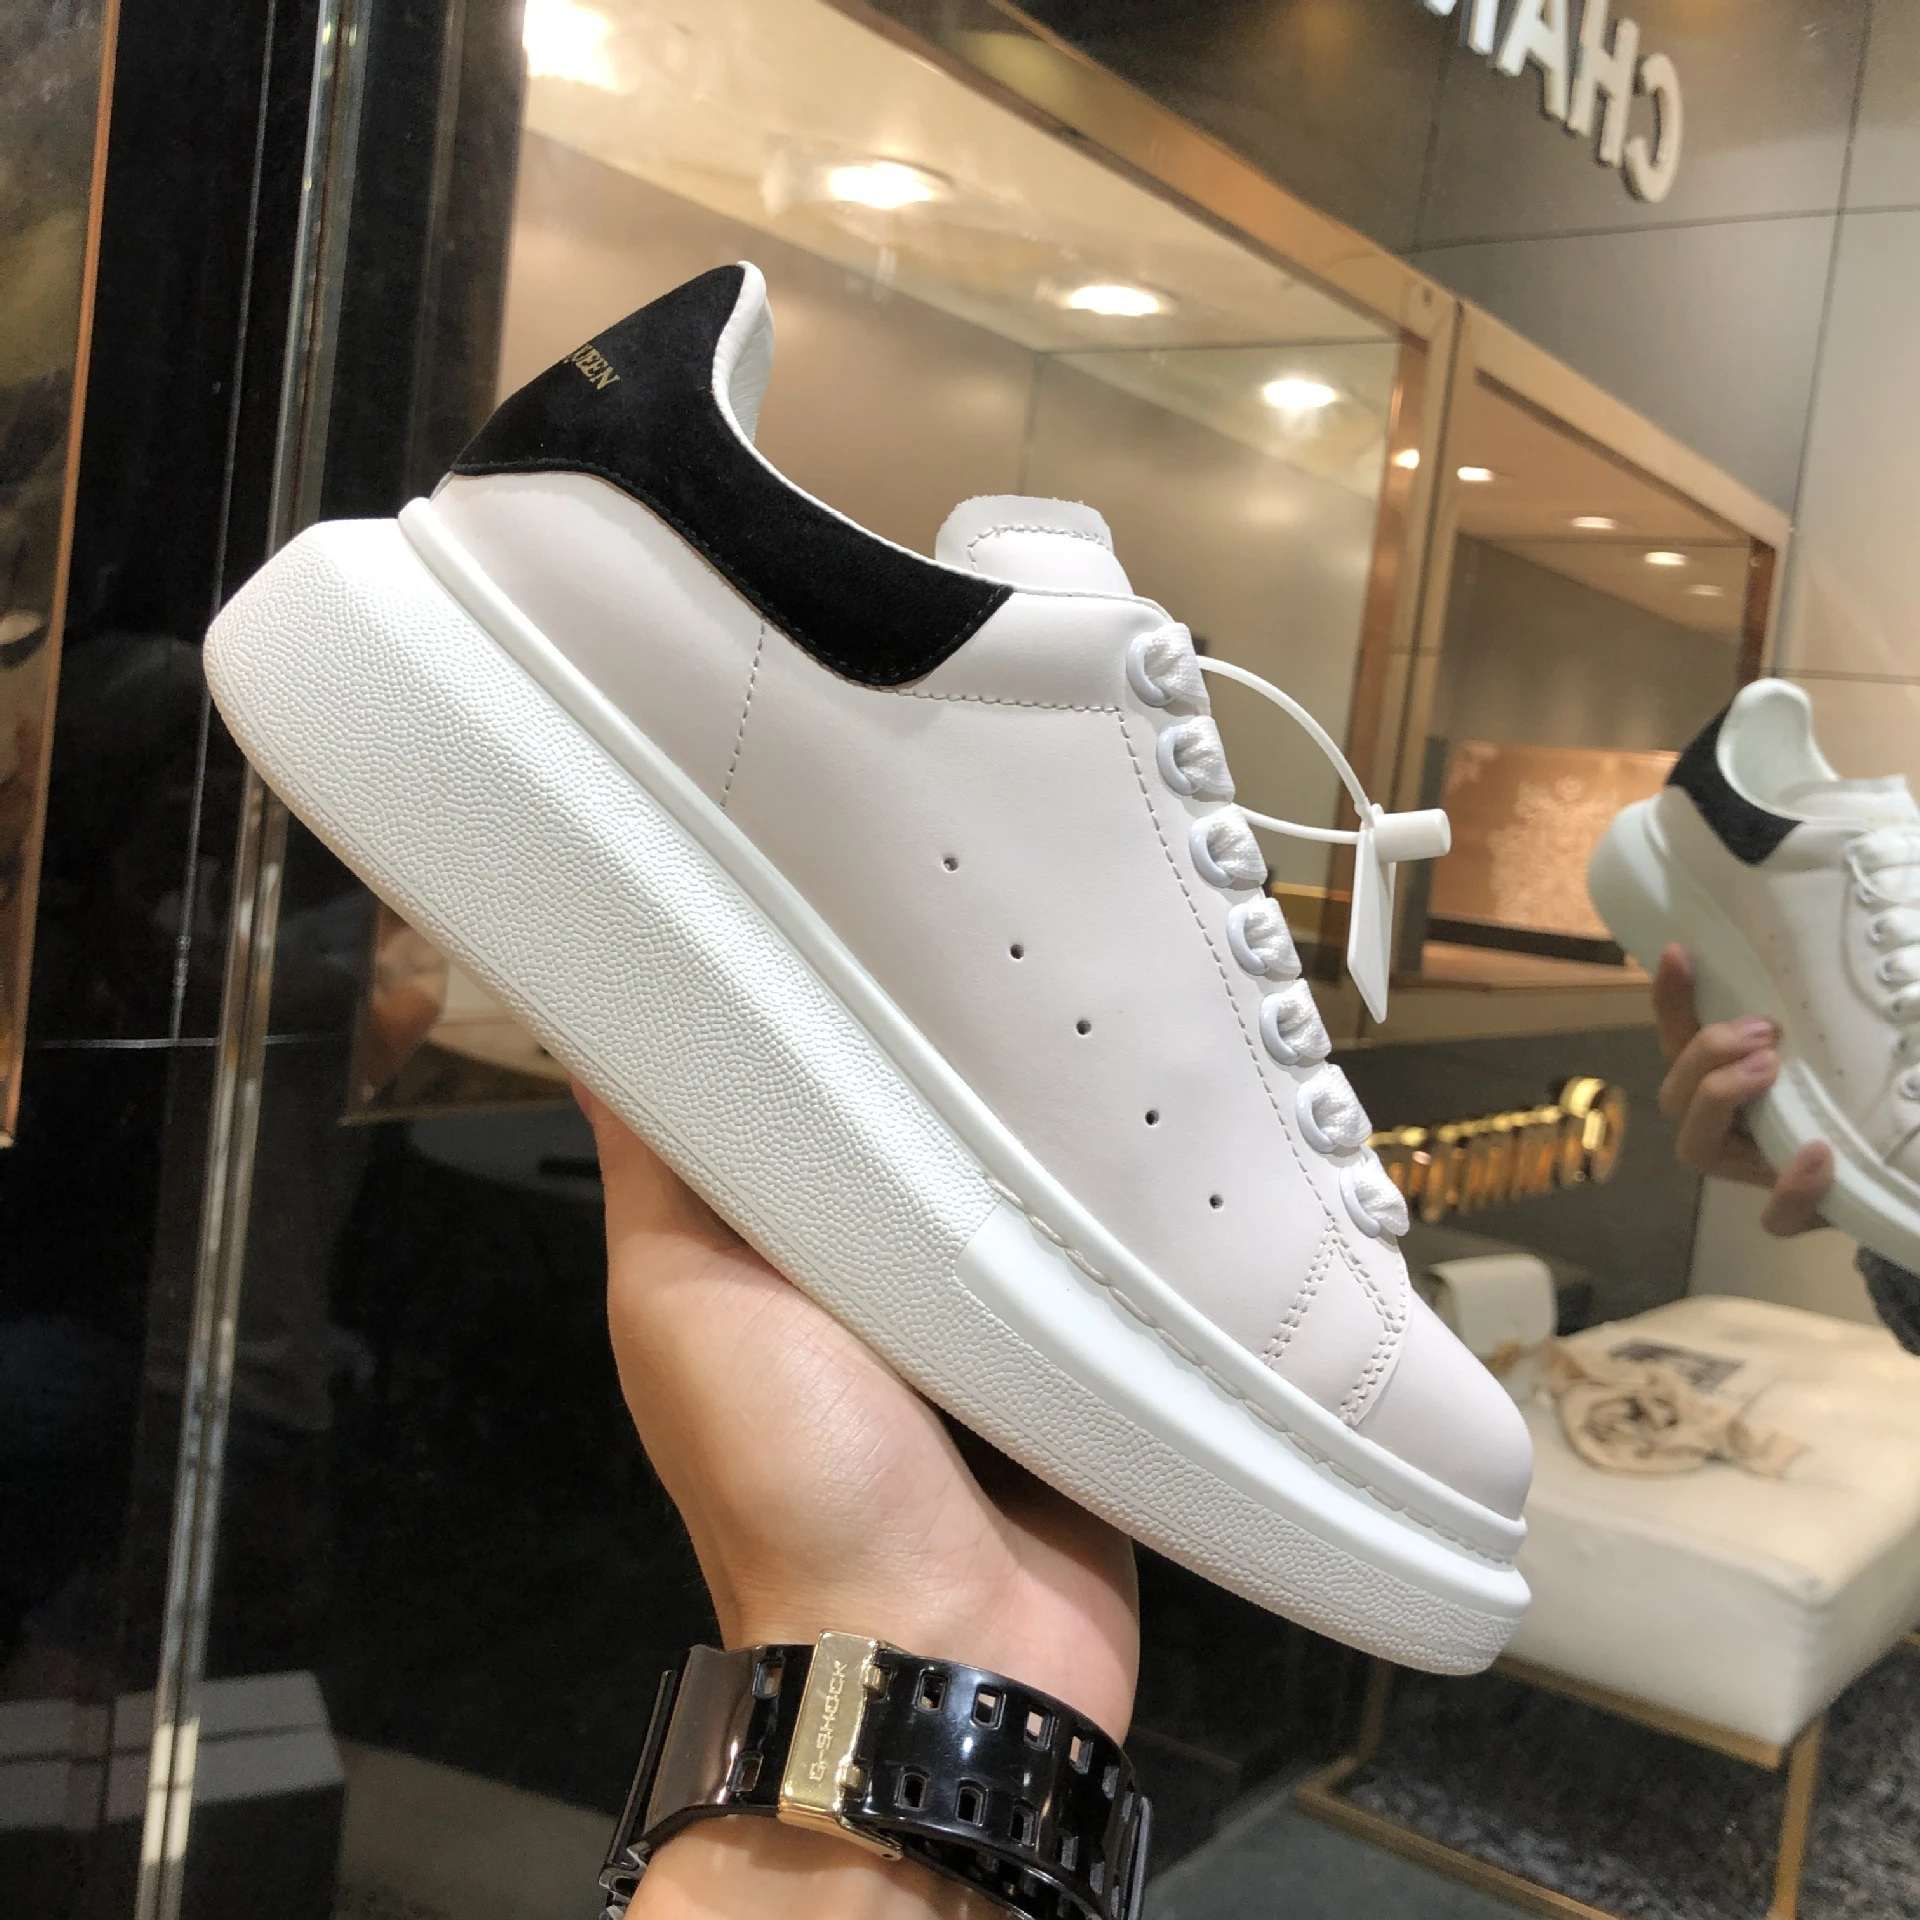 2021 New Couple Shoes Luxury Mcqueen Shoes Women Skateboard Shoes Sports  Man Alexander Shoes White Sneakers Increased Platform|Giày lội nước| -  AliExpress